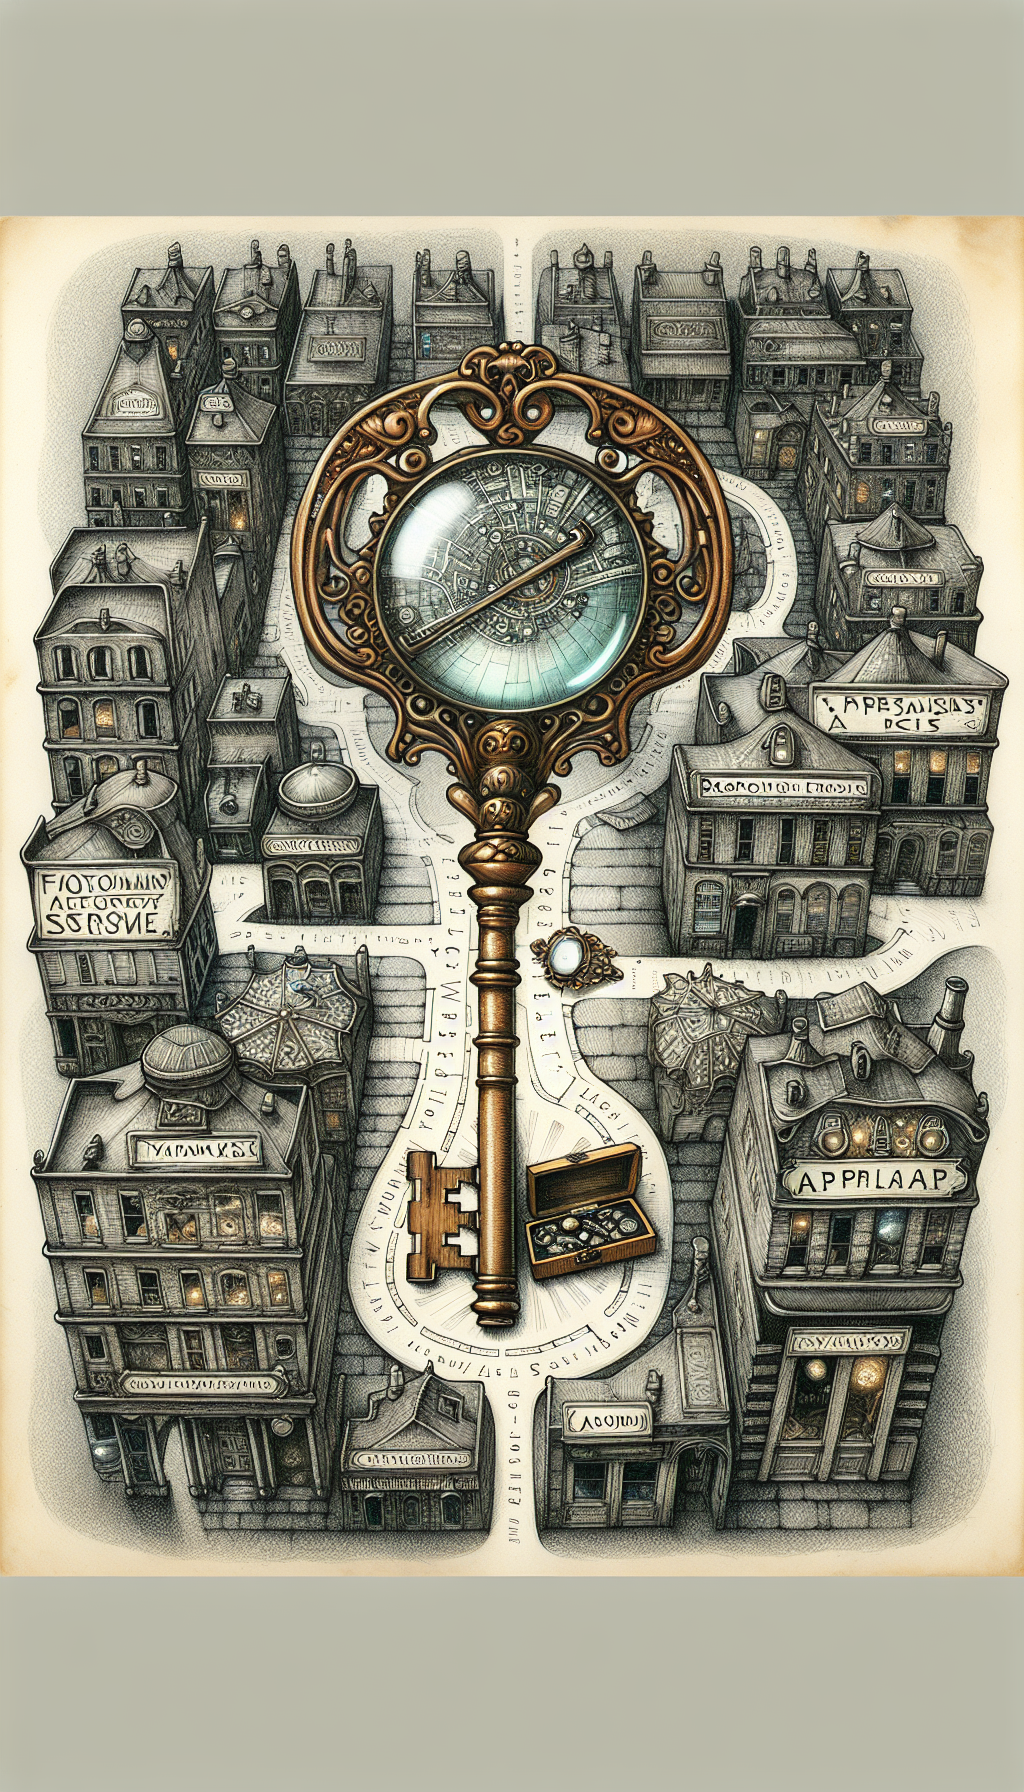 A whimsical steampunk-inspired key, ornately designed with a tiny magnifying glass handle, hovers over a hand-drawn map. Vintage storefronts dot the map’s winding streets, each labeled with different appraisal service names, while an ornate treasure chest filled with antique gems nestles at the illustration's center, highlighting the close proximity and essential nature of nearby appraisal services.